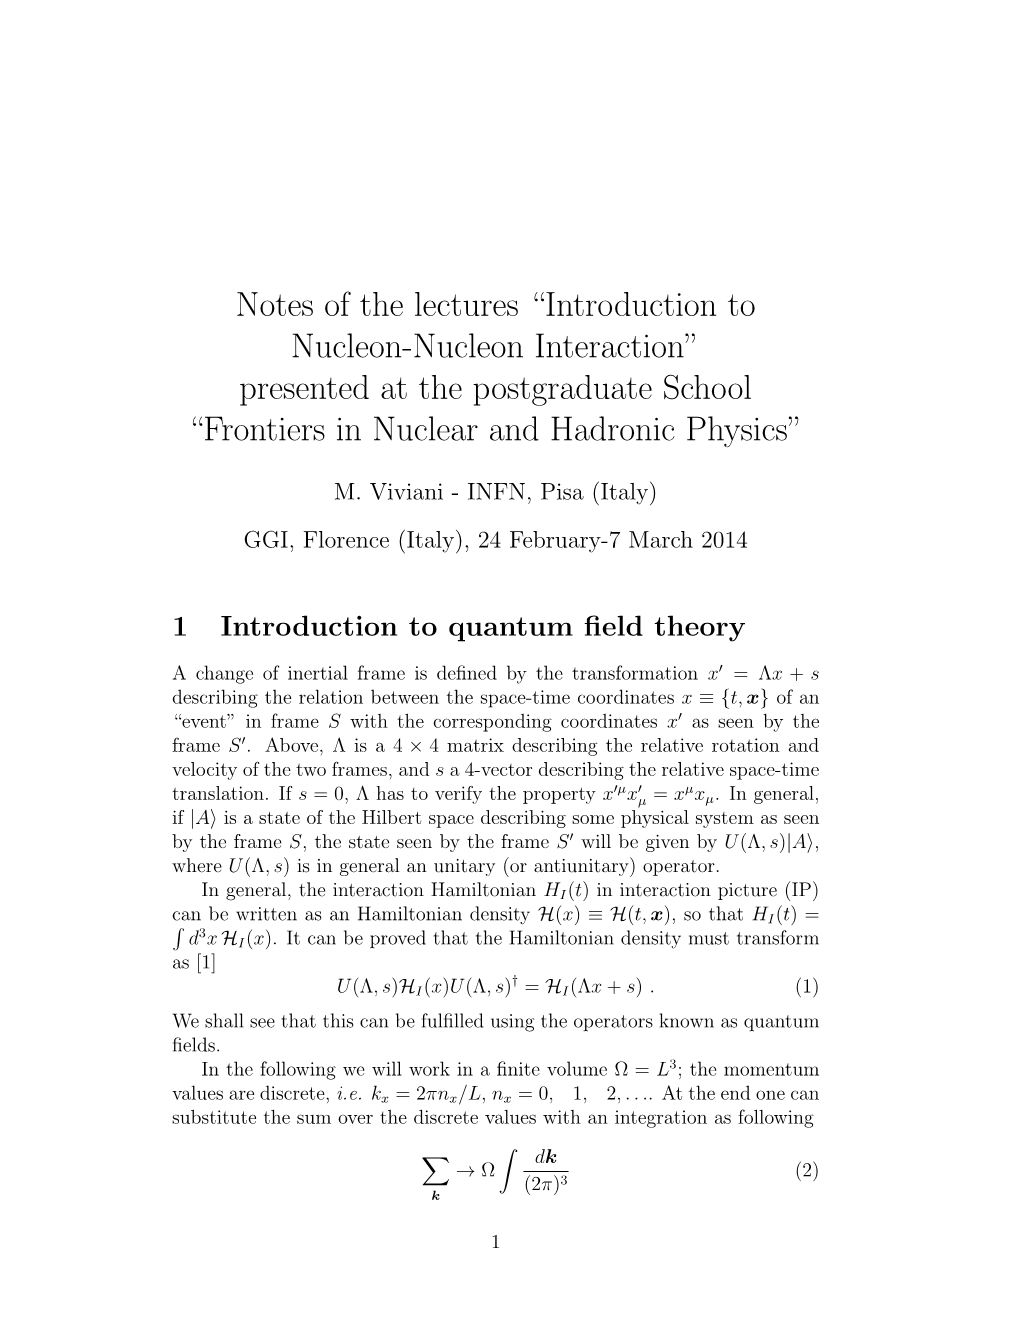 Notes of the Lectures “Introduction to Nucleon-Nucleon Interaction” Presented at the Postgraduate School “Frontiers in Nuclear and Hadronic Physics”